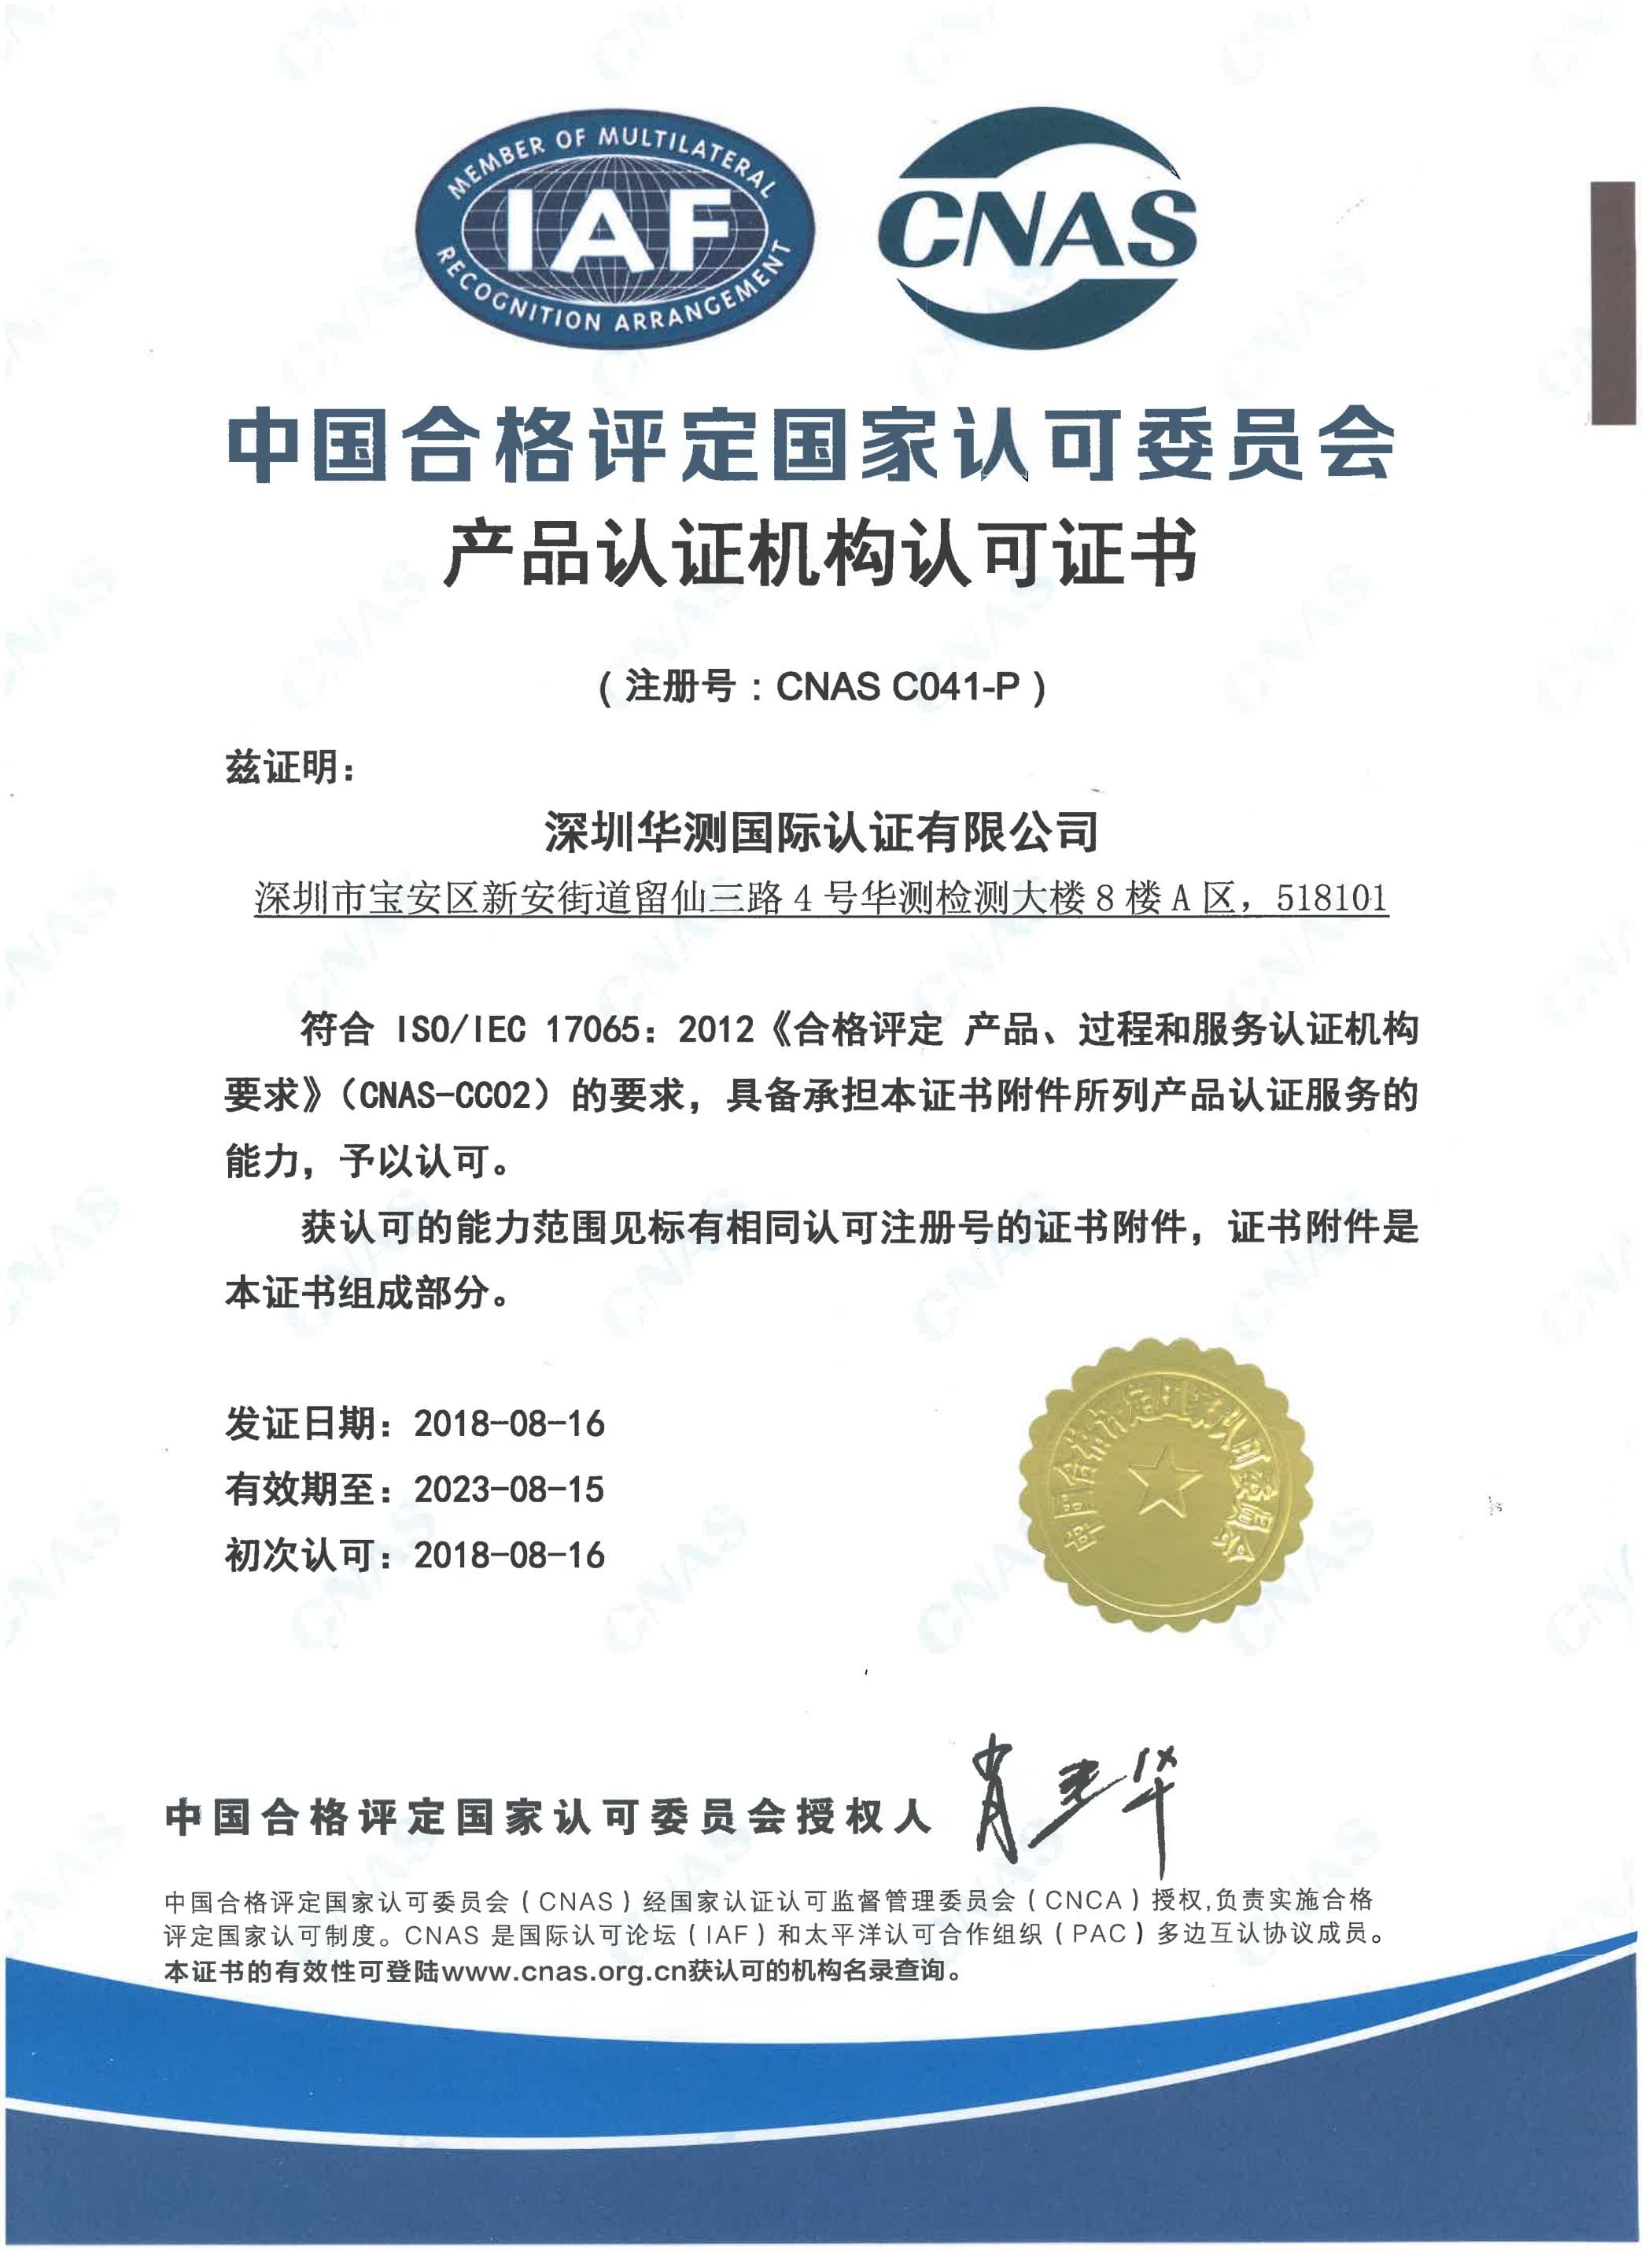 CNAS product certification body accreditation certificate